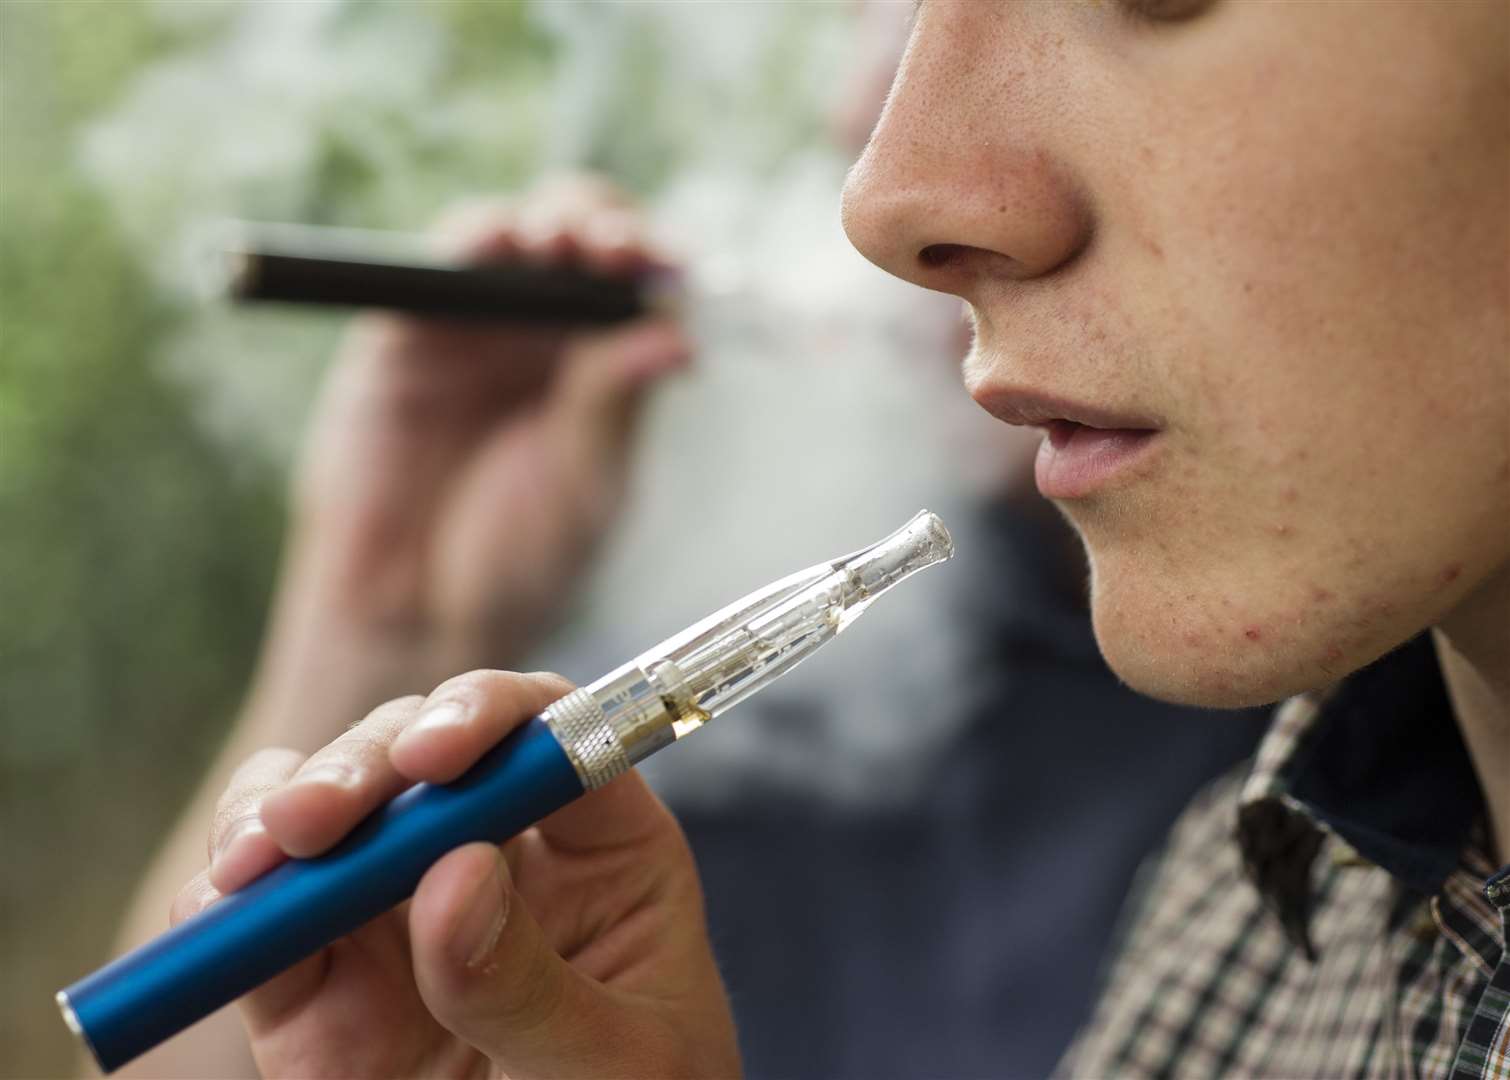 There’s no denying that vaping has helped some smokers kick the habbit. Image: iStock.